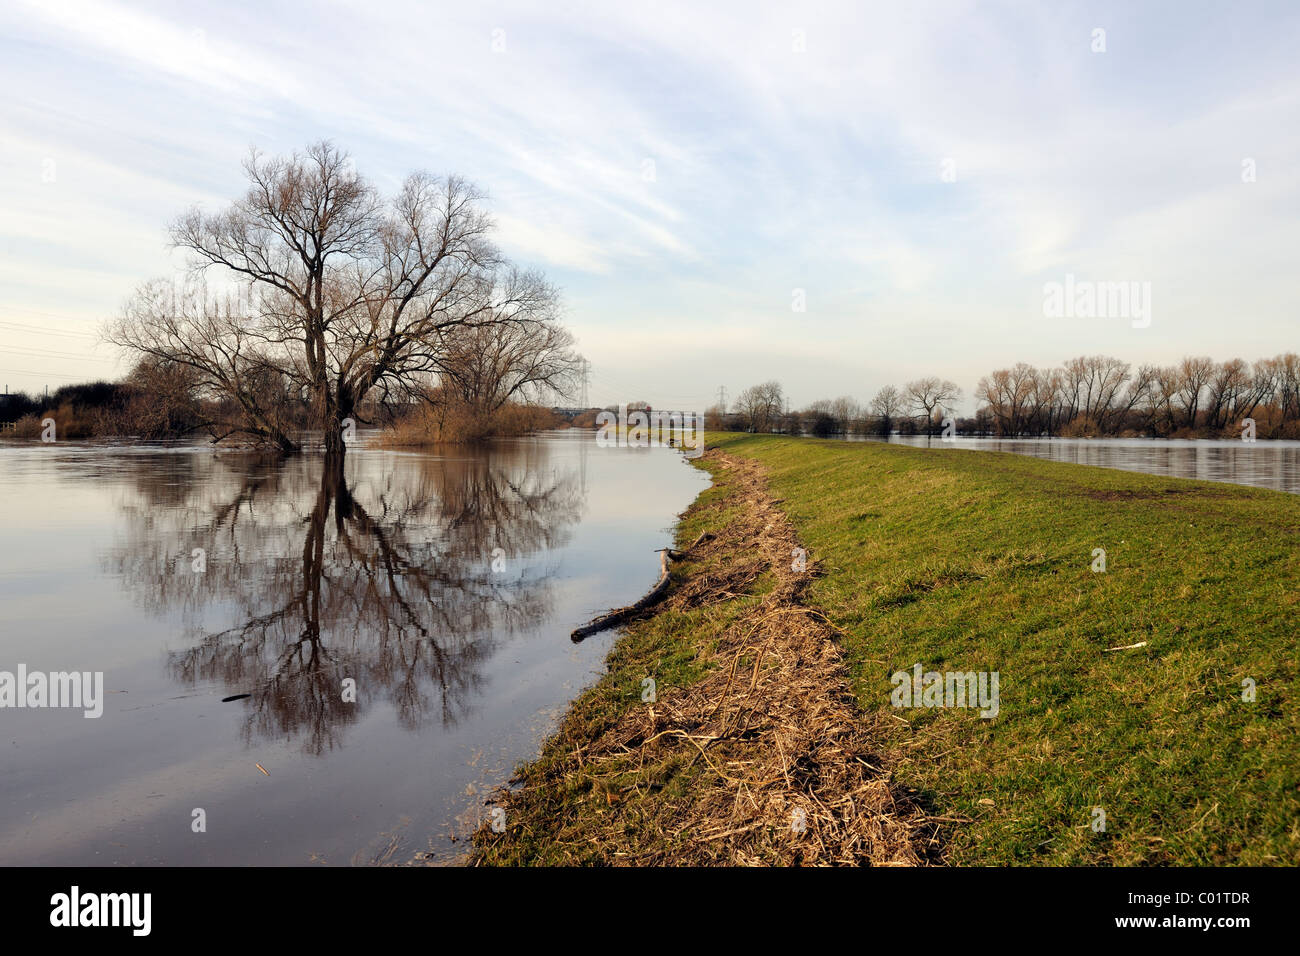 Looking upstream beside the flooded River Ouse, York, England Stock Photo